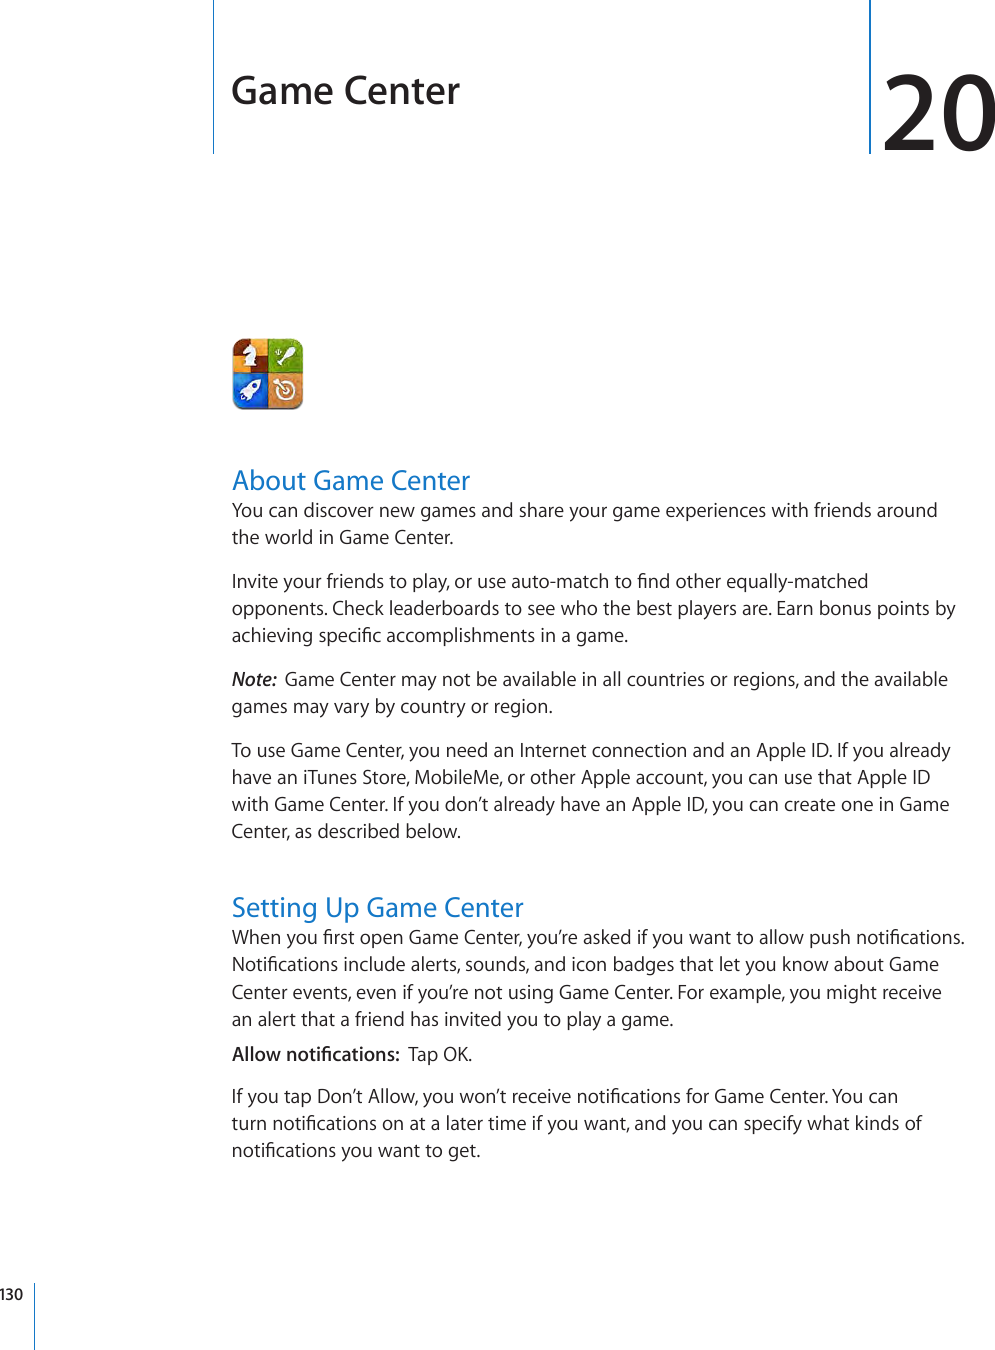 Game Center 20About Game CenterYou can discover new games and share your game experiences with friends around the world in Game Center. Invite your friends to play, or use auto-match to nd other equally-matched opponents. Check leaderboards to see who the best players are. Earn bonus points by achieving specic accomplishments in a game.Note:  Game Center may not be available in all countries or regions, and the available games may vary by country or region.To use Game Center, you need an Internet connection and an Apple ID. If you already have an iTunes Store, MobileMe, or other Apple account, you can use that Apple ID with Game Center. If you don’t already have an Apple ID, you can create one in Game Center, as described below.Setting Up Game CenterWhen you rst open Game Center, you’re asked if you want to allow push notications. Notications include alerts, sounds, and icon badges that let you know about Game Center events, even if you’re not using Game Center. For example, you might receive an alert that a friend has invited you to play a game. Allow notications:  Tap OK.If you tap Don’t Allow, you won’t receive notications for Game Center. You can turn notications on at a later time if you want, and you can specify what kinds of notications you want to get.130